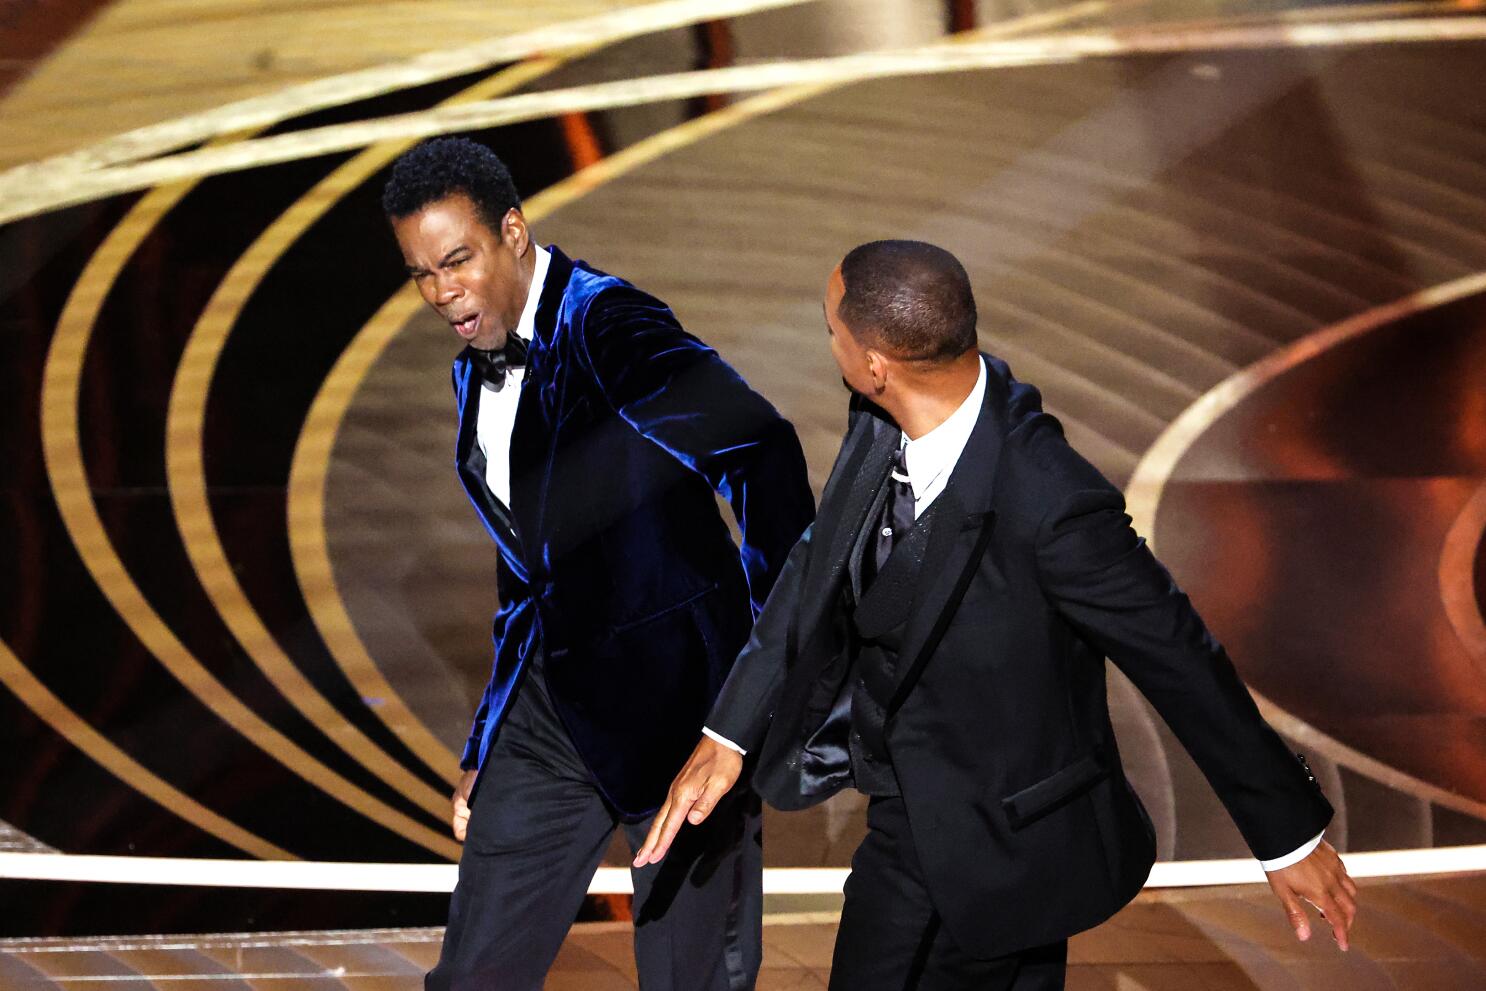 Oscars 2021: The Most Memorable Moments